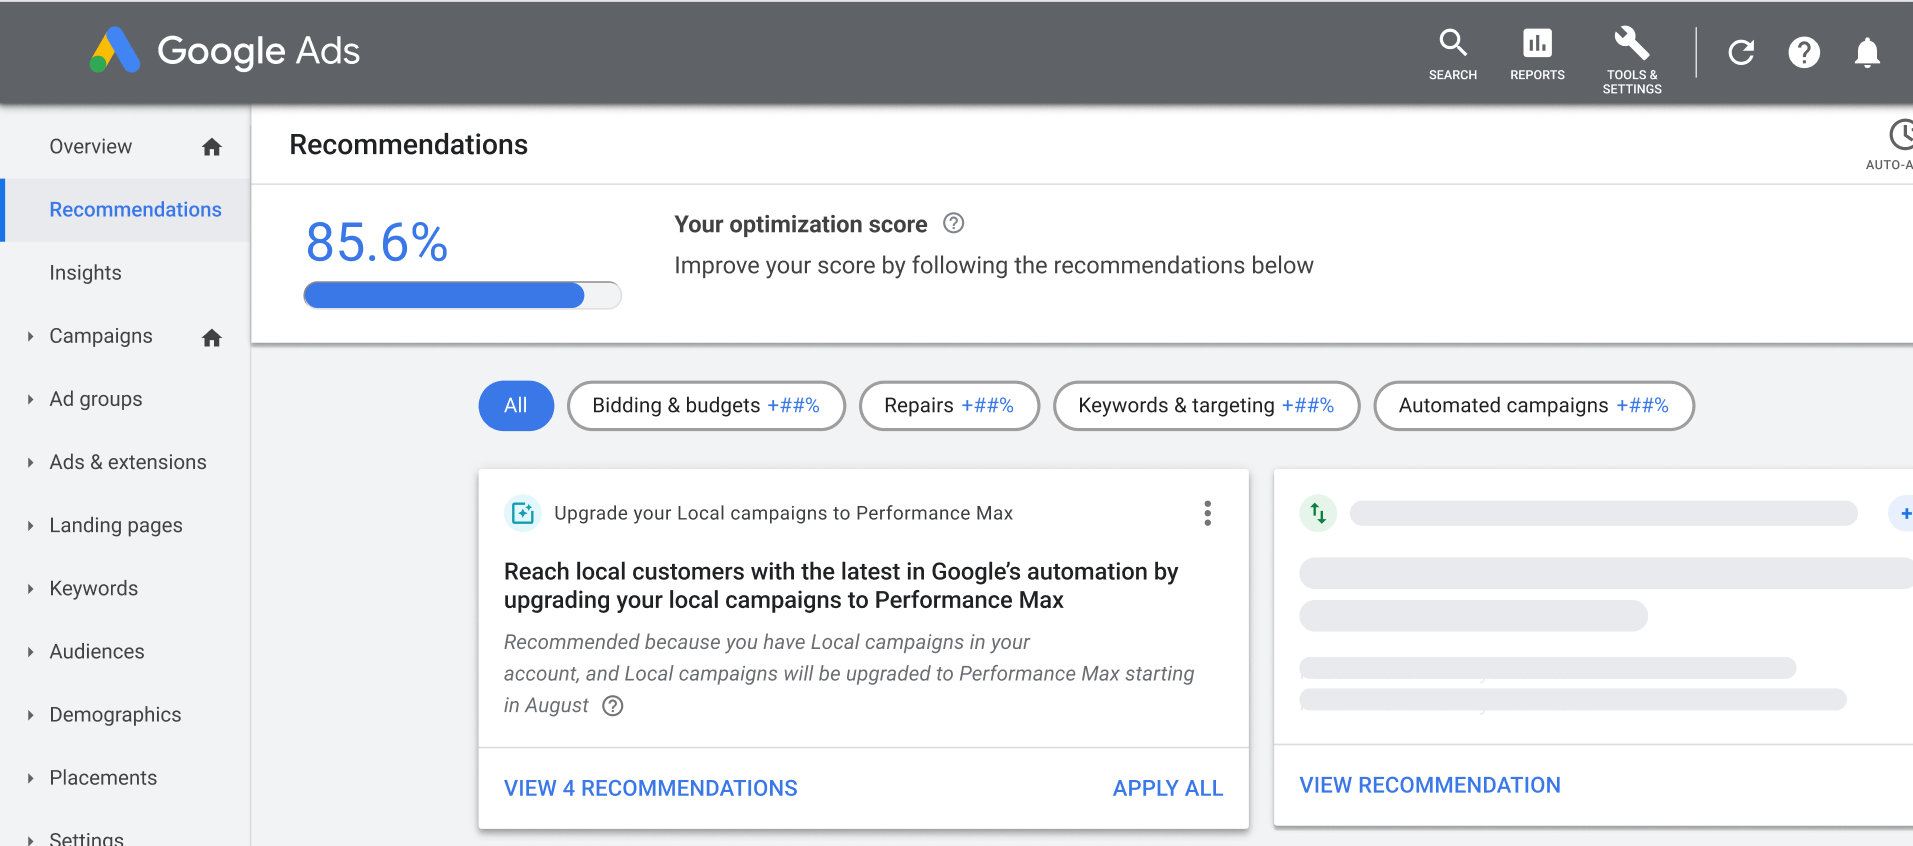 Google Ads launches Performance Max upgrade tool